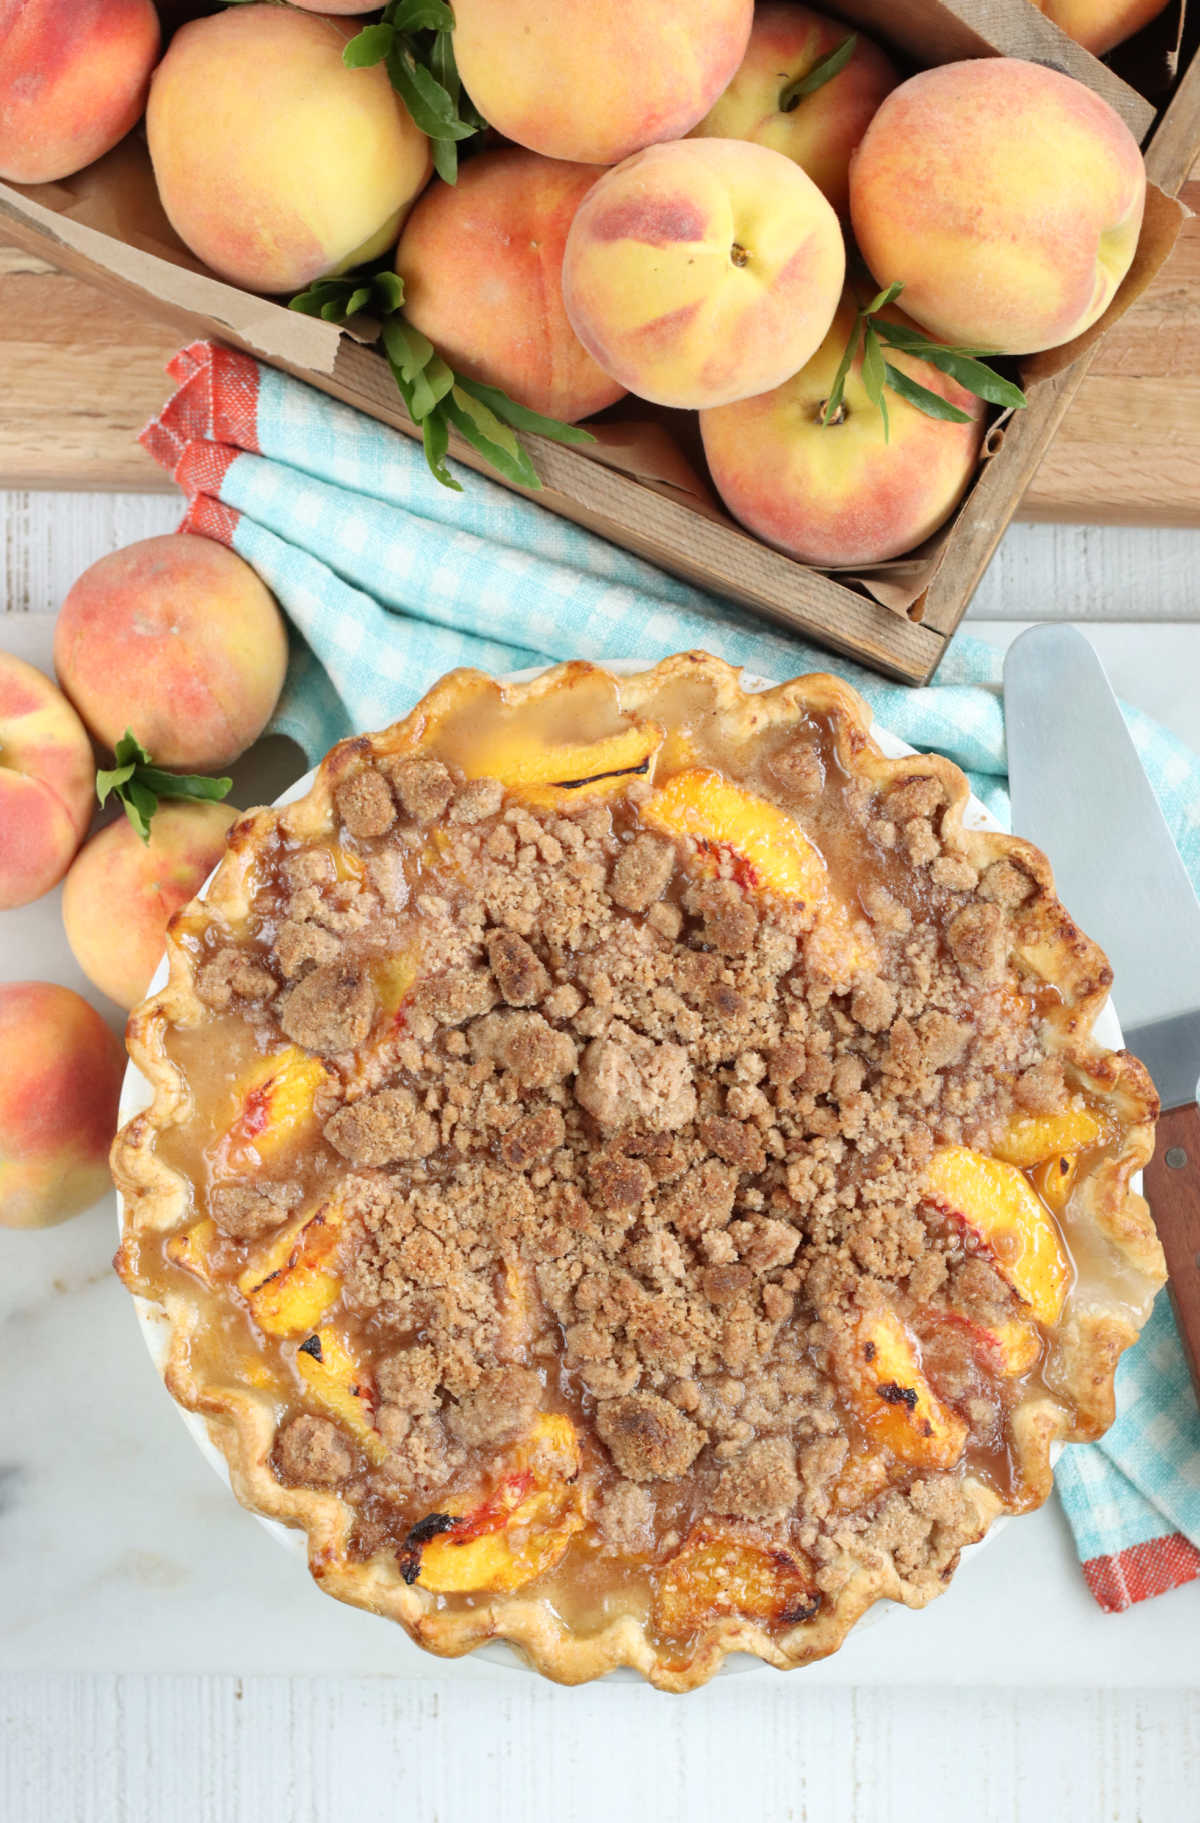 Peach pie with crumb topping, fresh peaches around in wooden box.